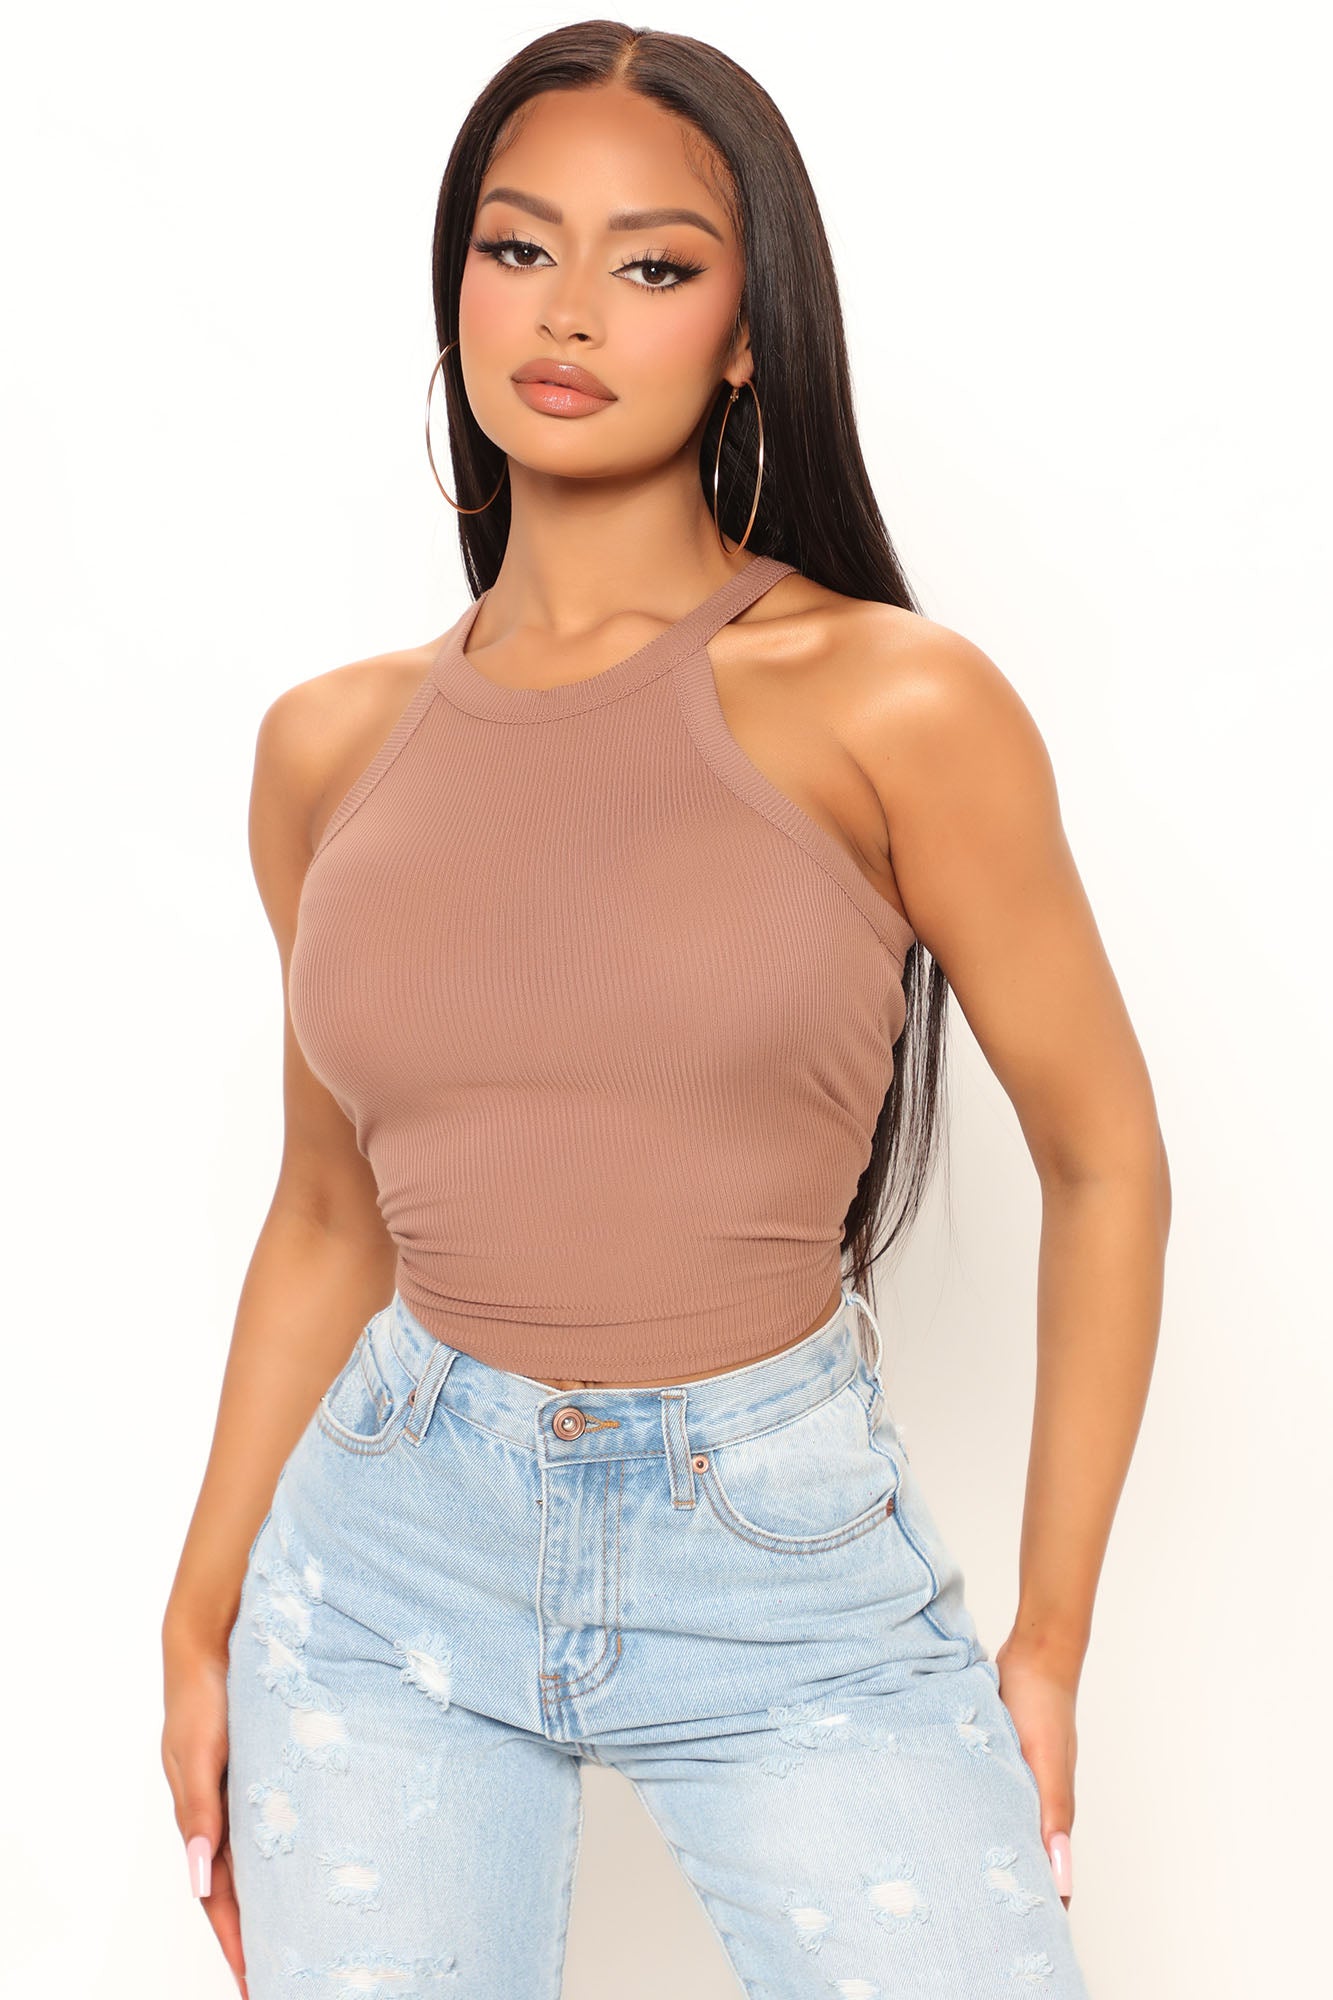 Women's Kaylee High Neck Crop Ribbed Tank Top in White Size Large by Fashion Nova